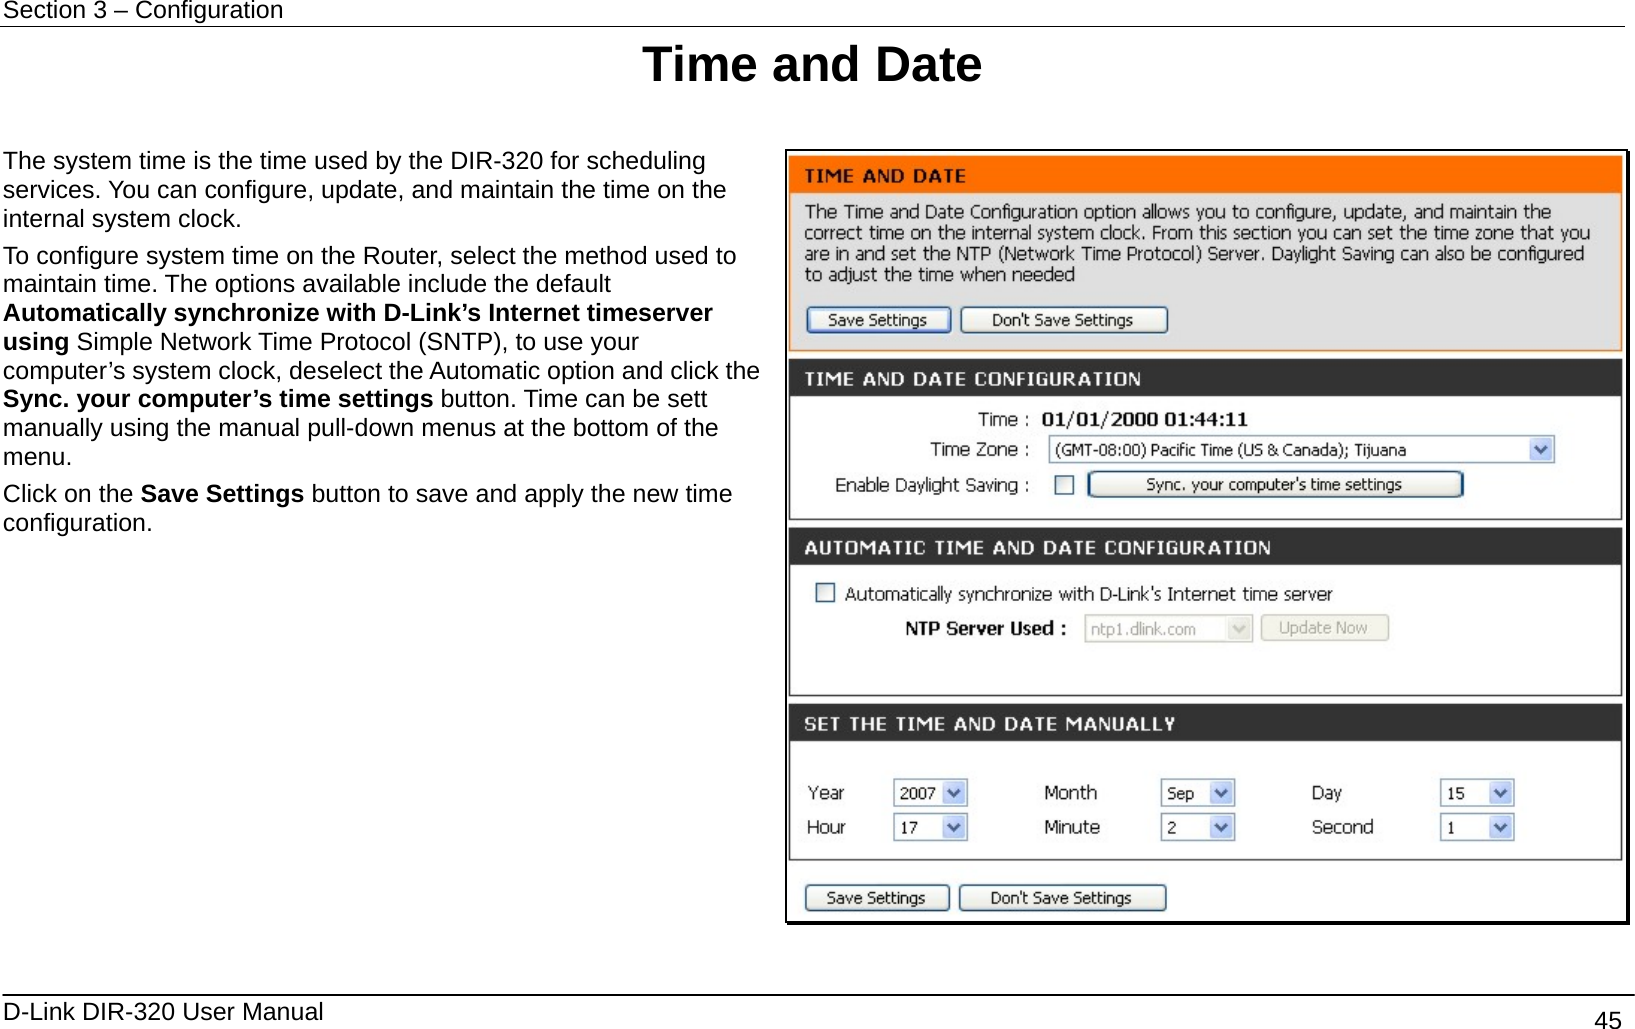 Section 3 – Configuration   D-Link DIR-320 User Manual                                       45 Time and Date  The system time is the time used by the DIR-320 for scheduling services. You can configure, update, and maintain the time on the internal system clock.   To configure system time on the Router, select the method used to maintain time. The options available include the default Automatically synchronize with D-Link’s Internet timeserver using Simple Network Time Protocol (SNTP), to use your computer’s system clock, deselect the Automatic option and click the Sync. your computer’s time settings button. Time can be sett manually using the manual pull-down menus at the bottom of the menu.  Click on the Save Settings button to save and apply the new time configuration.     